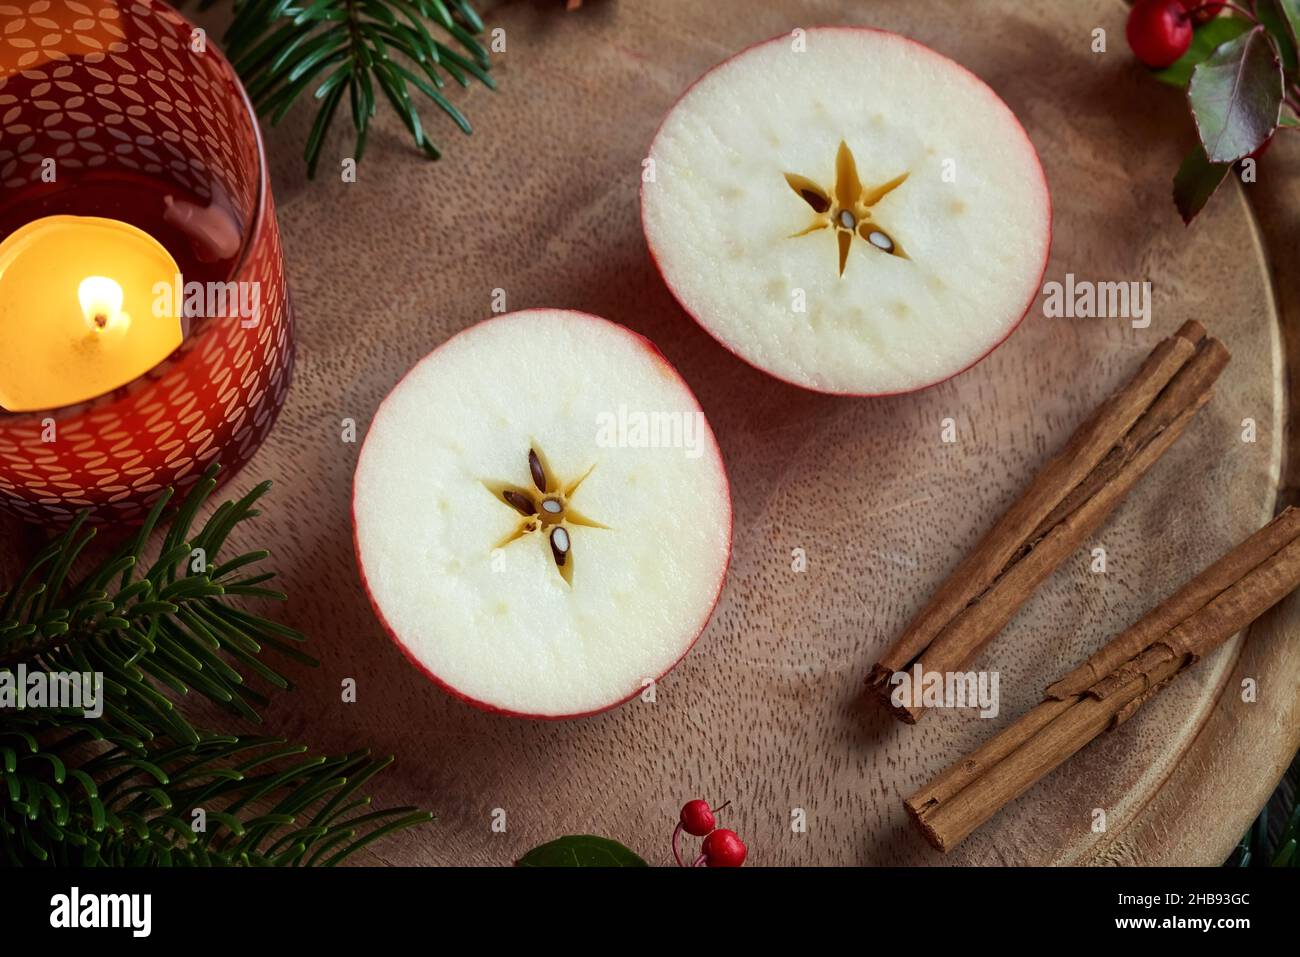 Red apple cut in two halves with a star in the middle - old Christmas custom Stock Photo